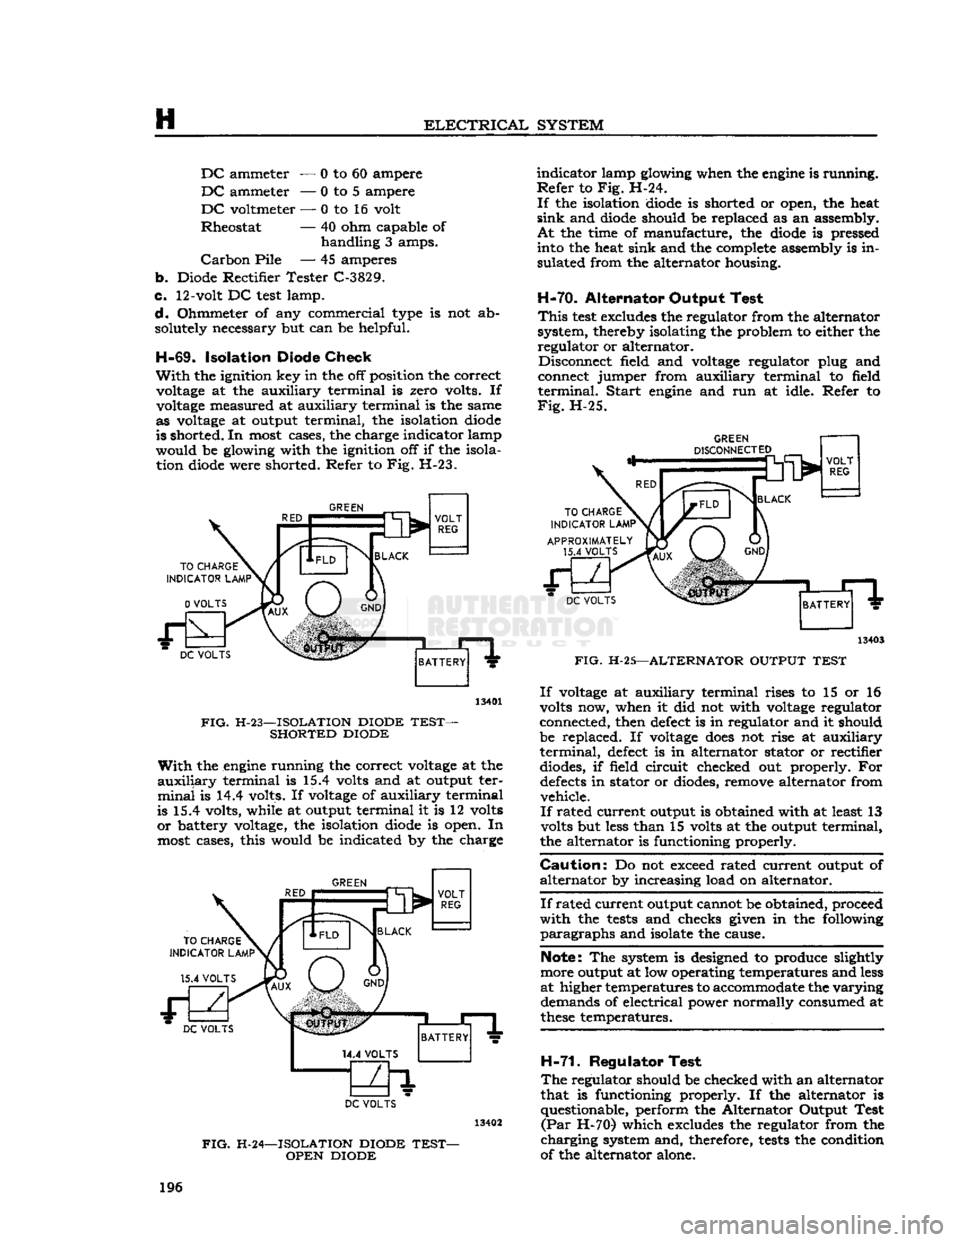 JEEP CJ 1953  Service Manual 
H 

ELECTRICAL
 SYSTEM DC
 ammeter — 0 to 60 ampere 

DC
 ammeter — 0 to 5 ampere 

DC
 voltmeter — 0 to 16 volt 
Rheostat — 40 ohm capable of 
 handling
 3 amps. 

Carbon
 Pile — 45 ampere